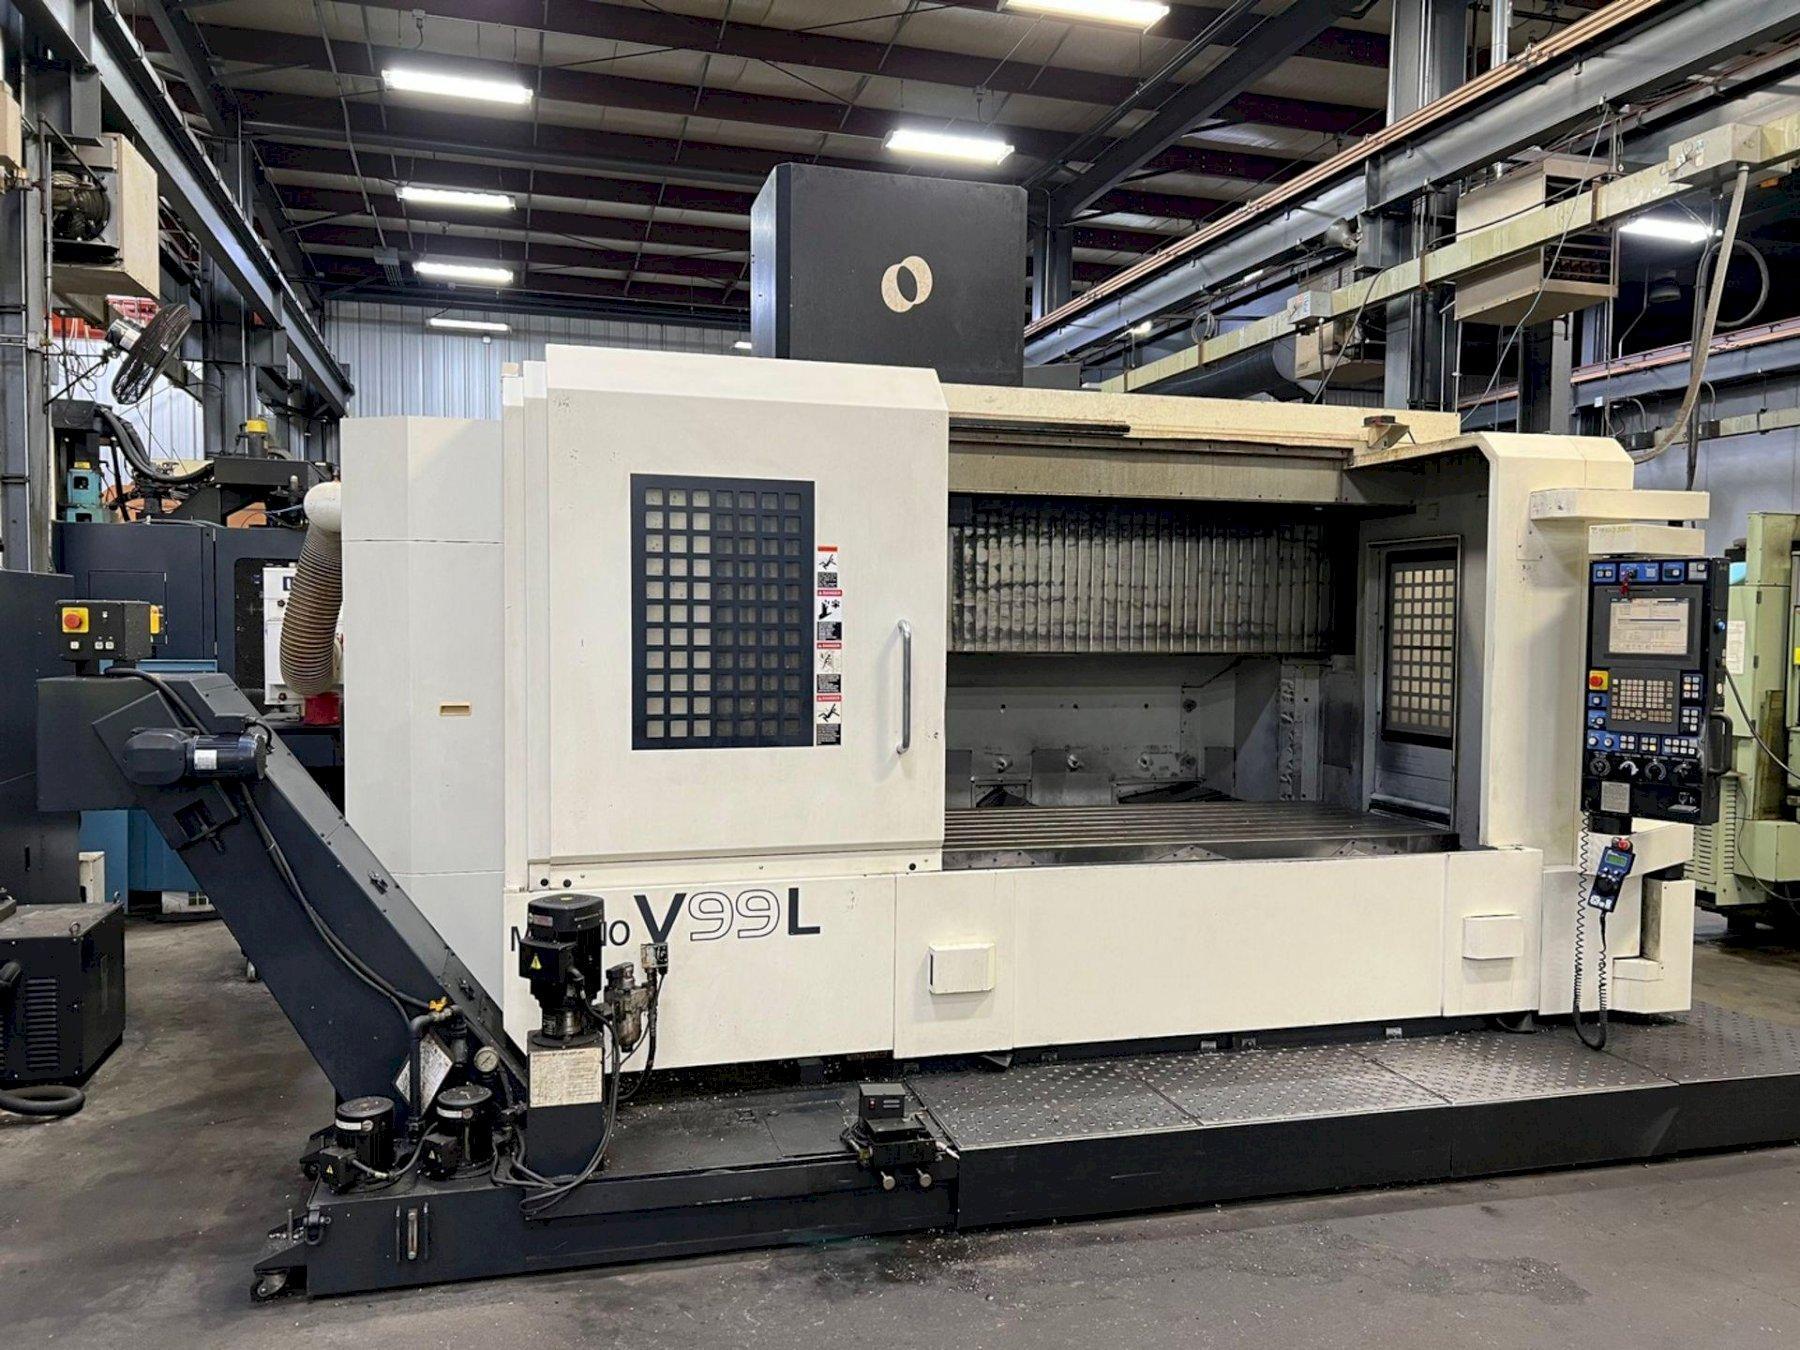 Makino V99L Used CNC Vertical Machining Center For Sale - 2008